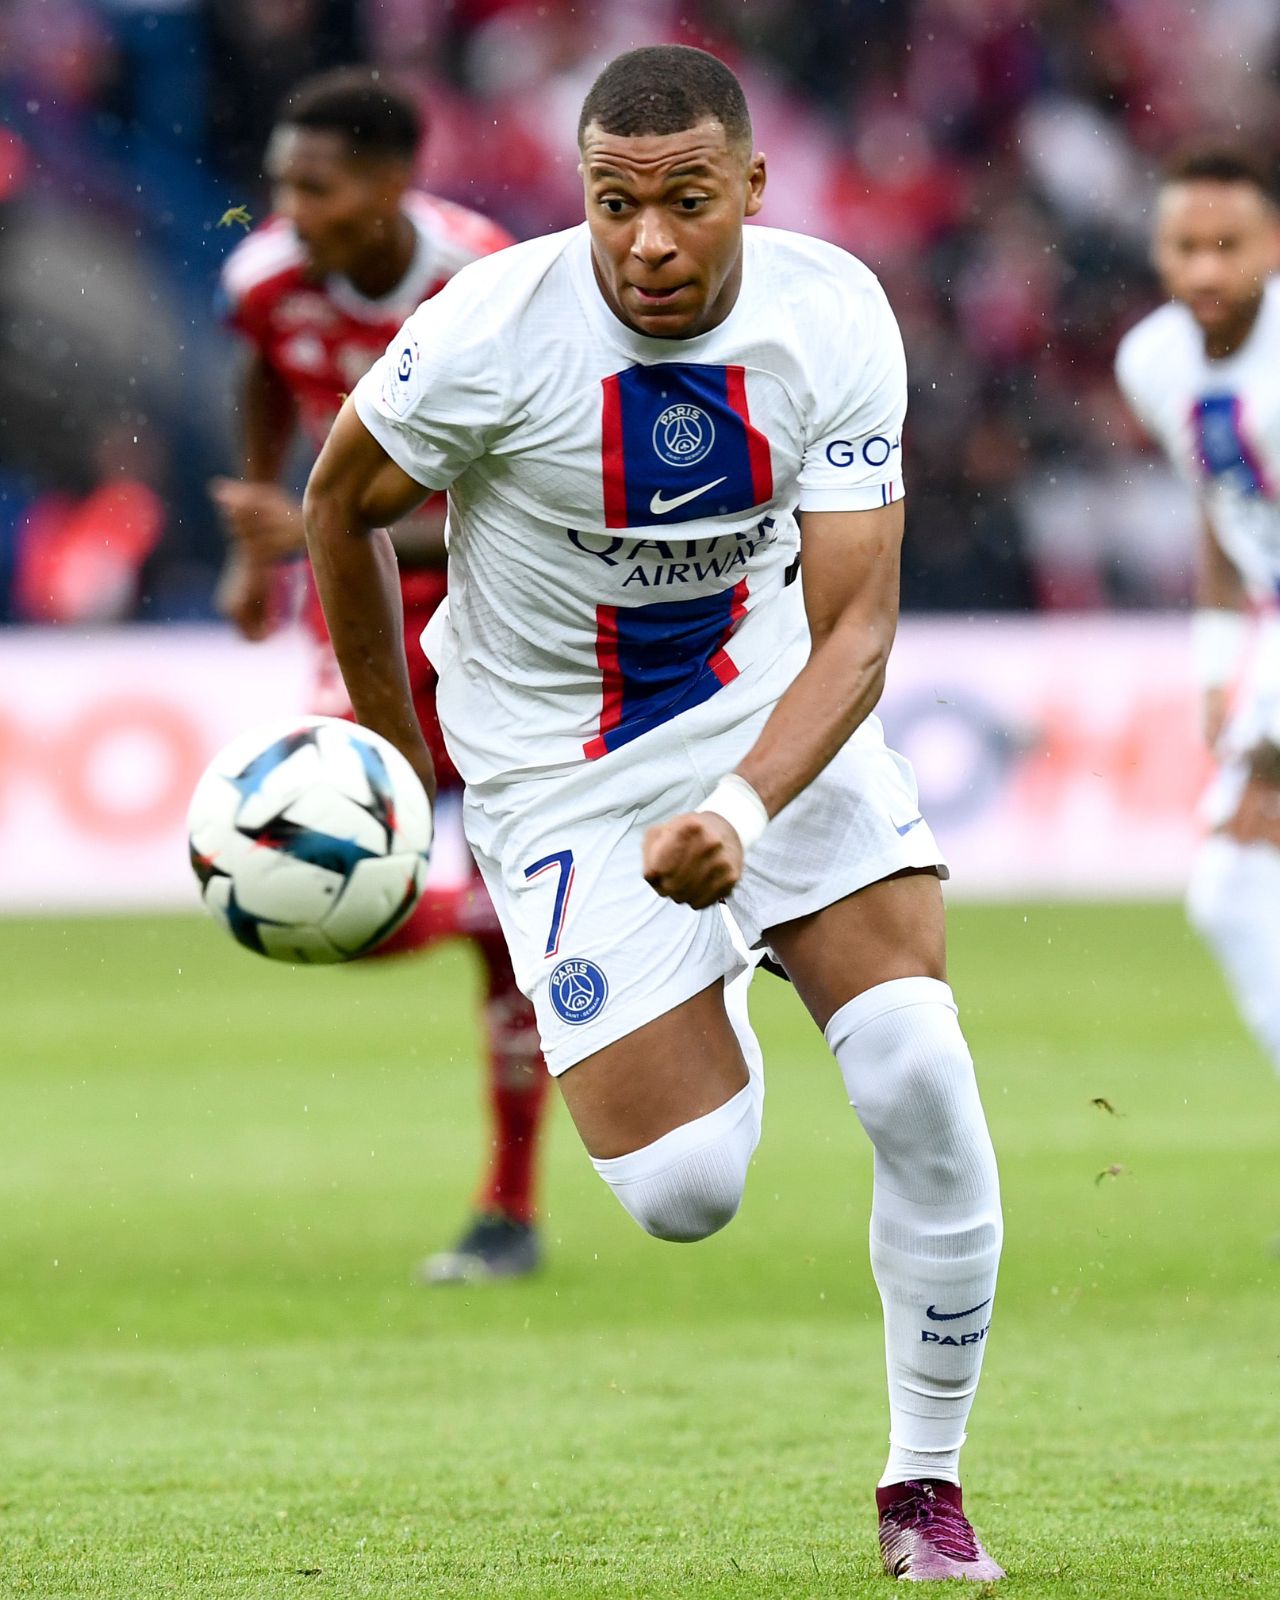 The Moffi keeping pace with Mbappé